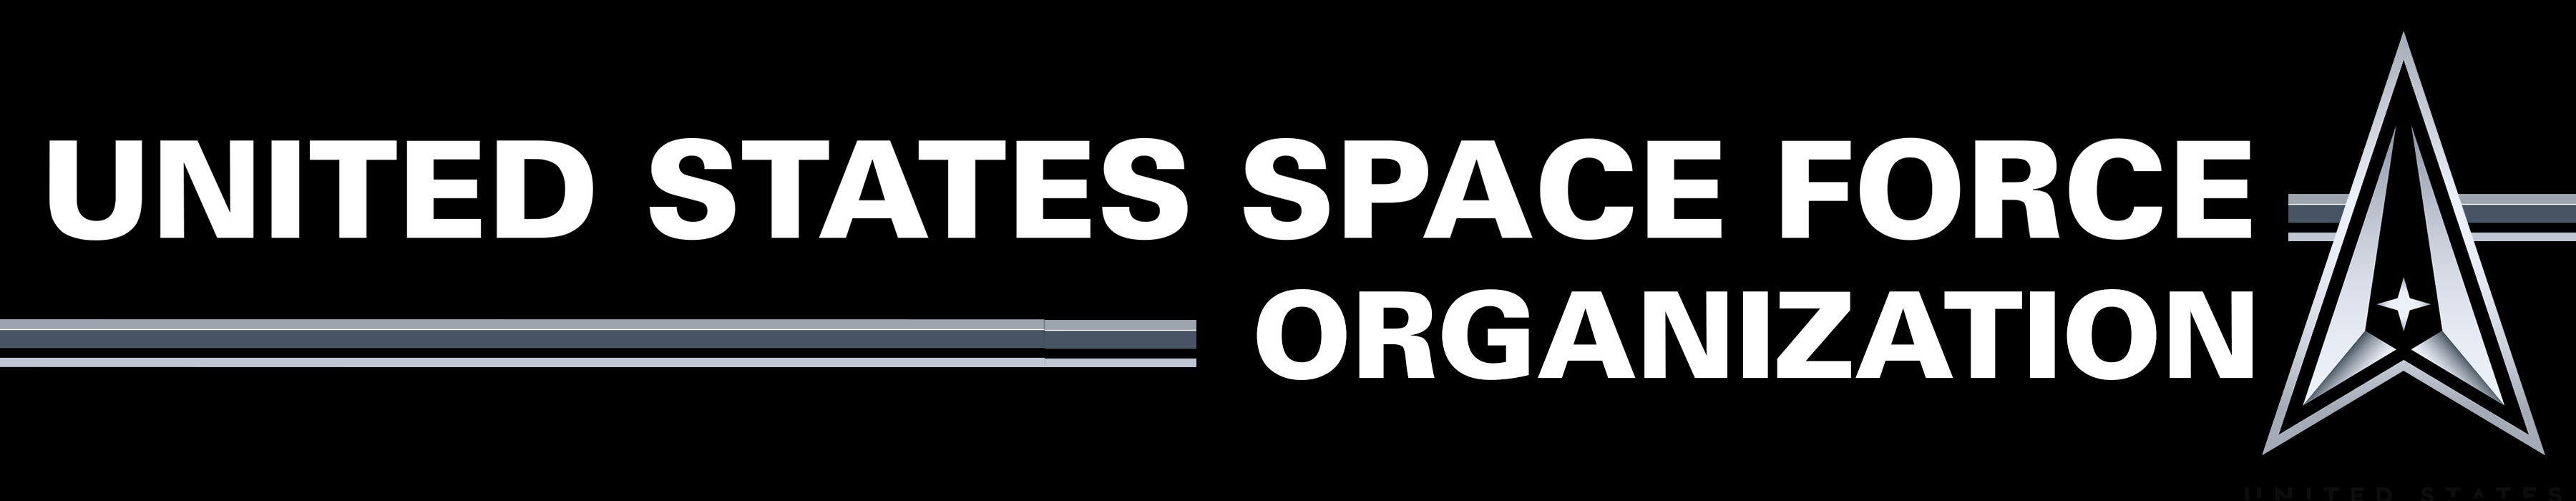 Space Force organization graphic